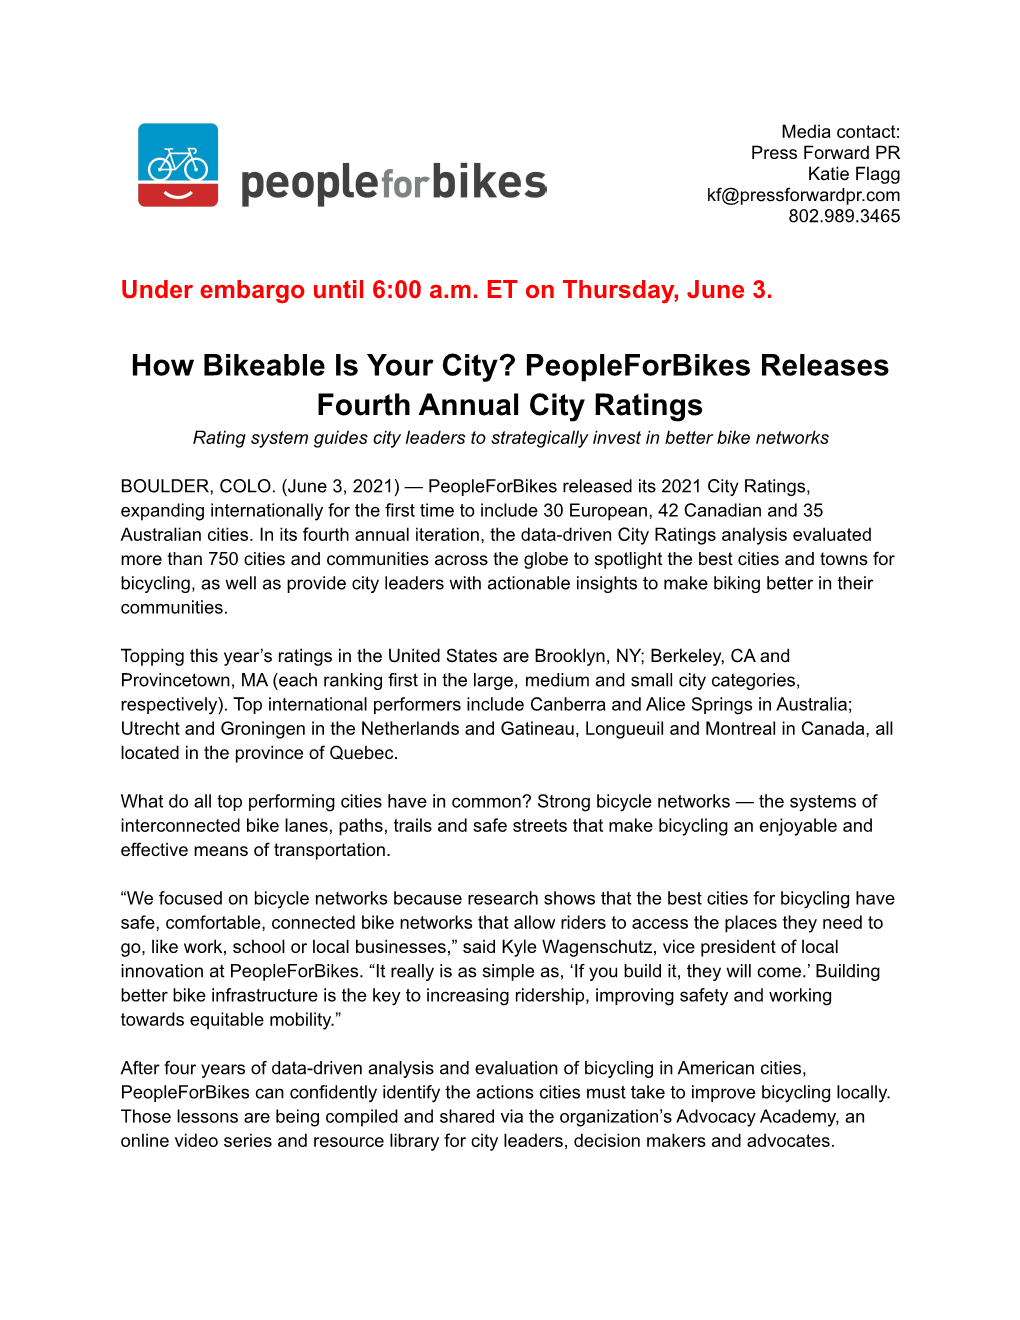 Peopleforbikes Releases Fourth Annual City Ratings Rating System Guides City Leaders to Strategically Invest in Better Bike Networks